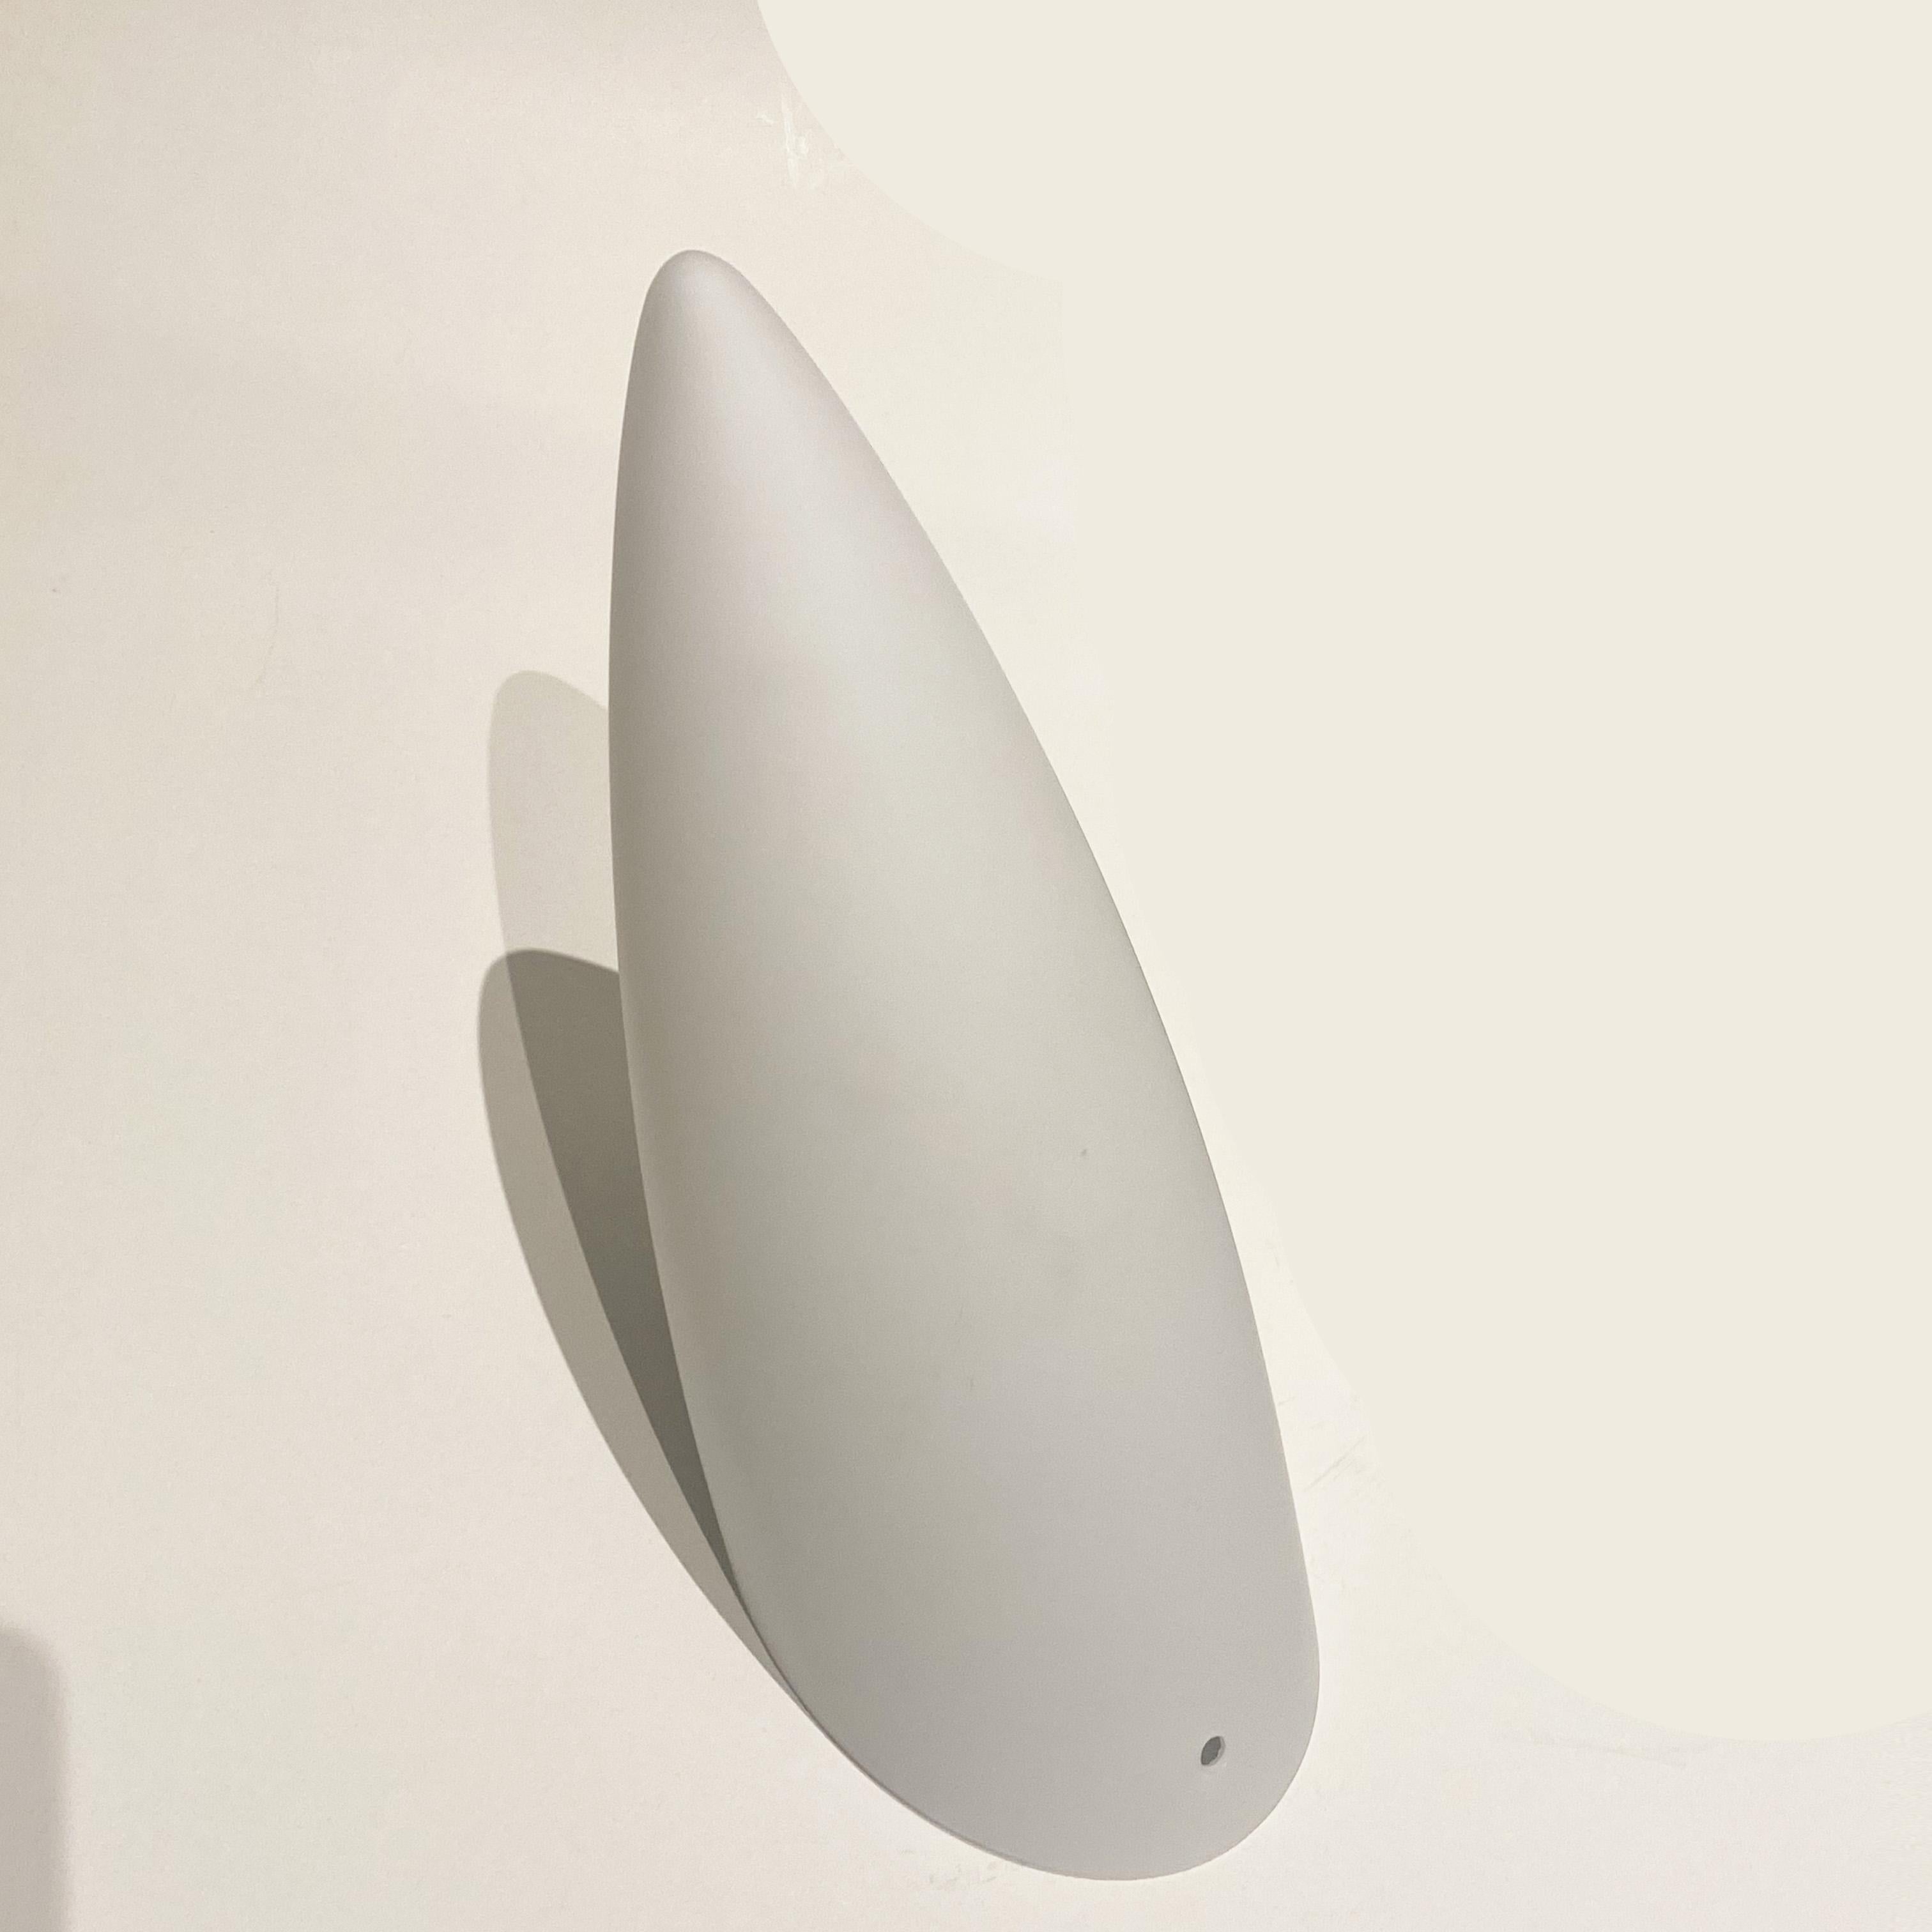 Postmodern Philippe Starck Luci Fair Sconces for Flos, 
1st edition from 1989.